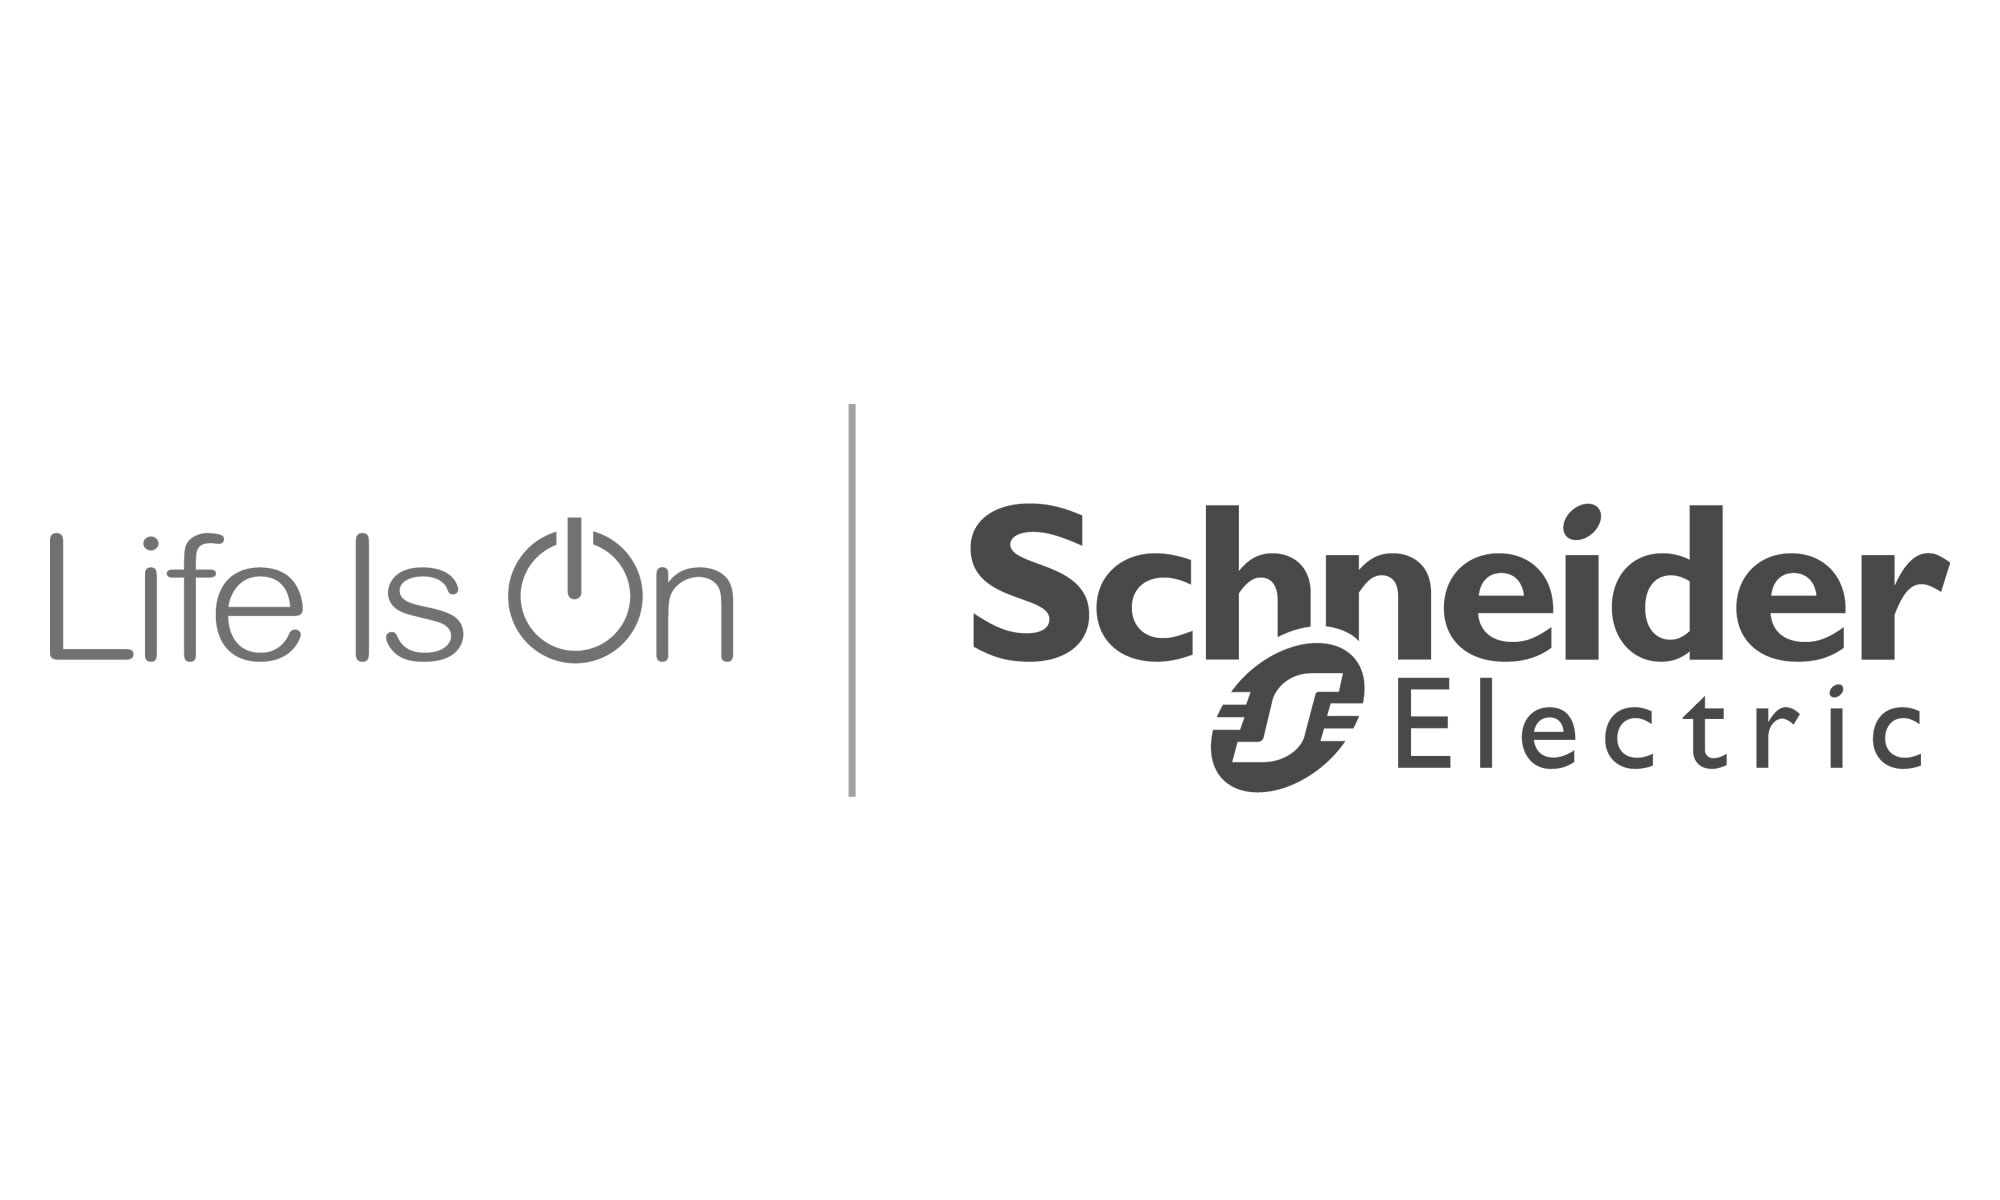 Schneider’s purpose is to empower all to make the most of our energy and resources, bridging progress and sustainability for all. At Schneider, we call this Life Is On.